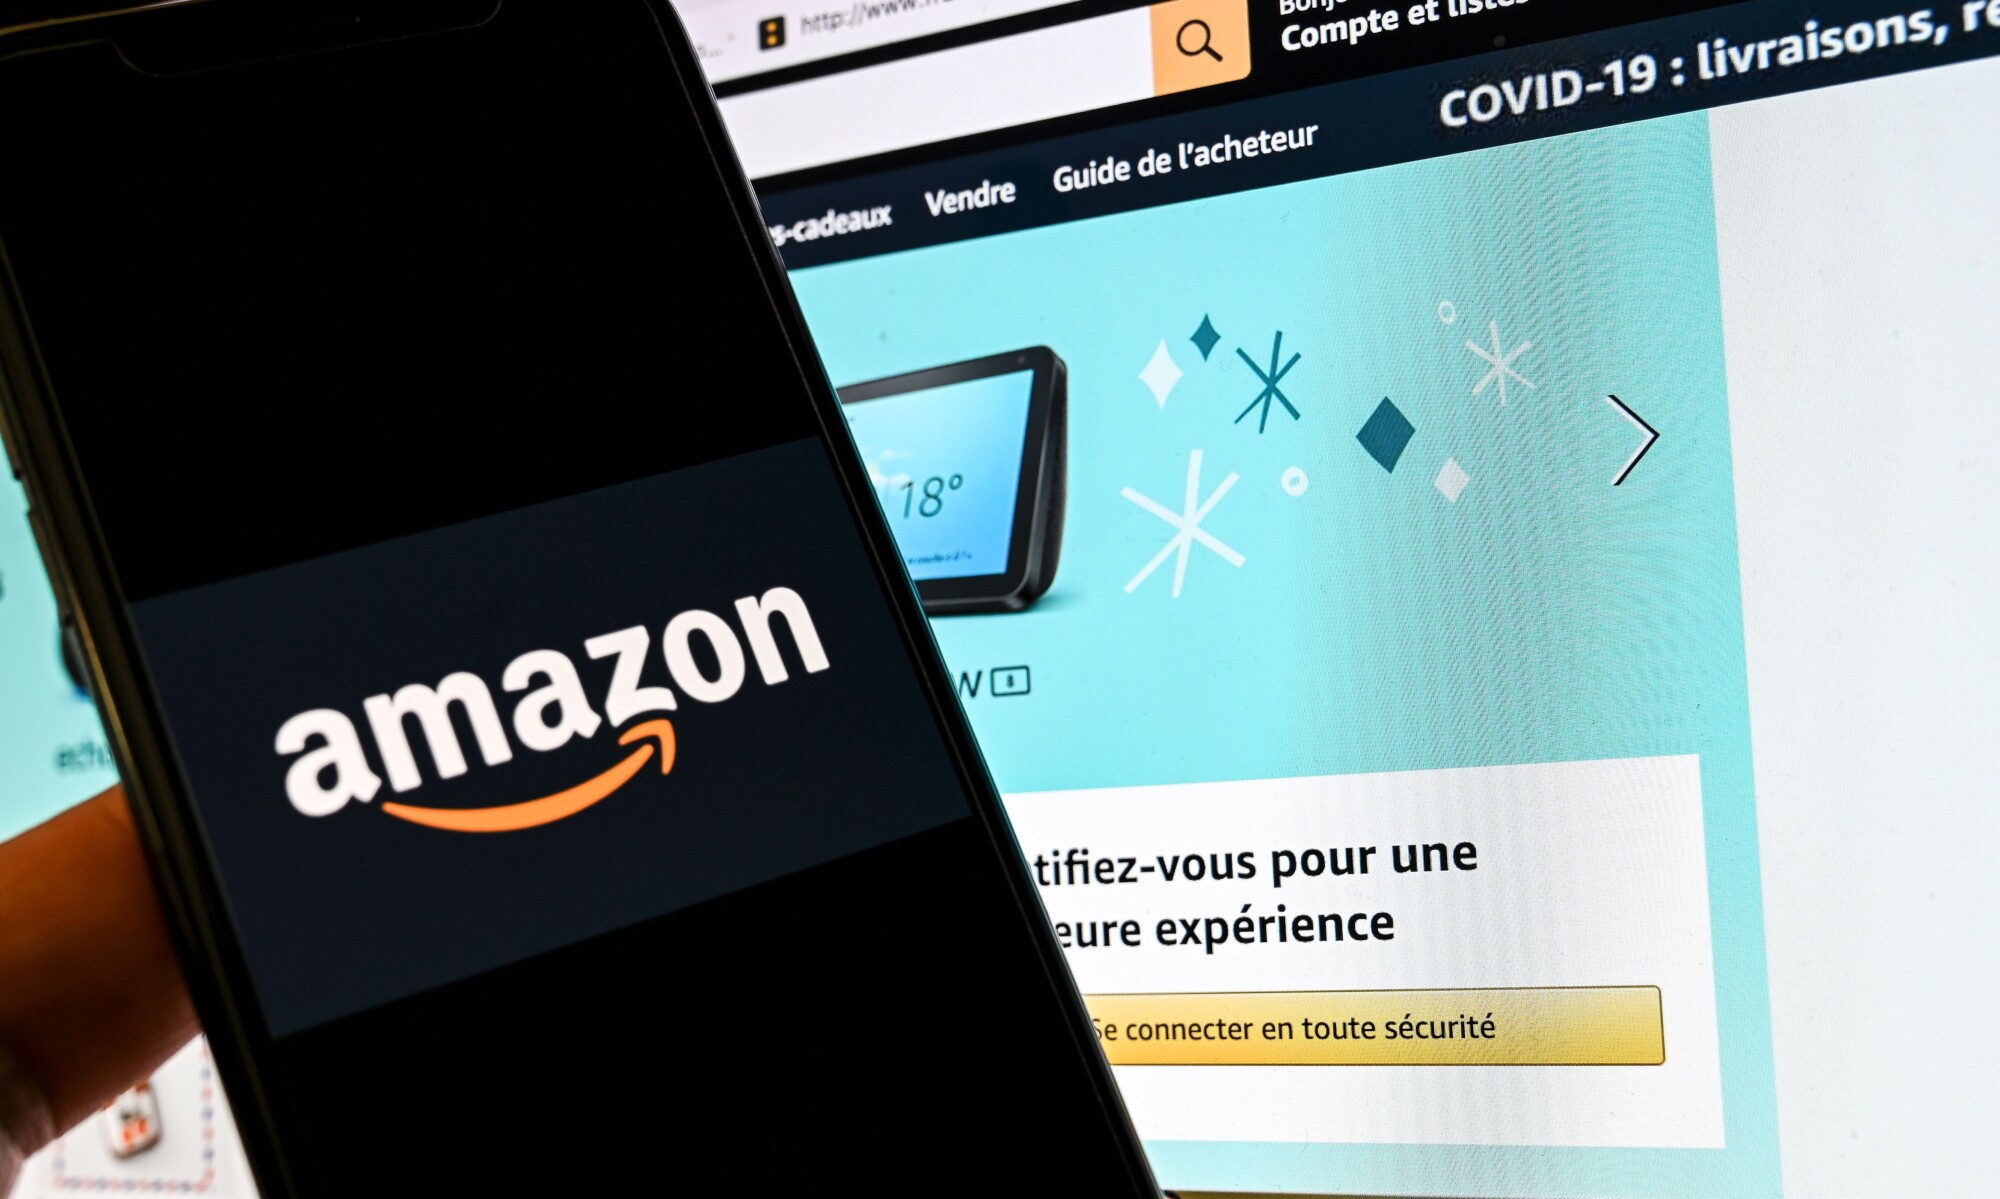 amazon-to-give-500-million-in-holiday-bonuses-to-front-line-us-workers